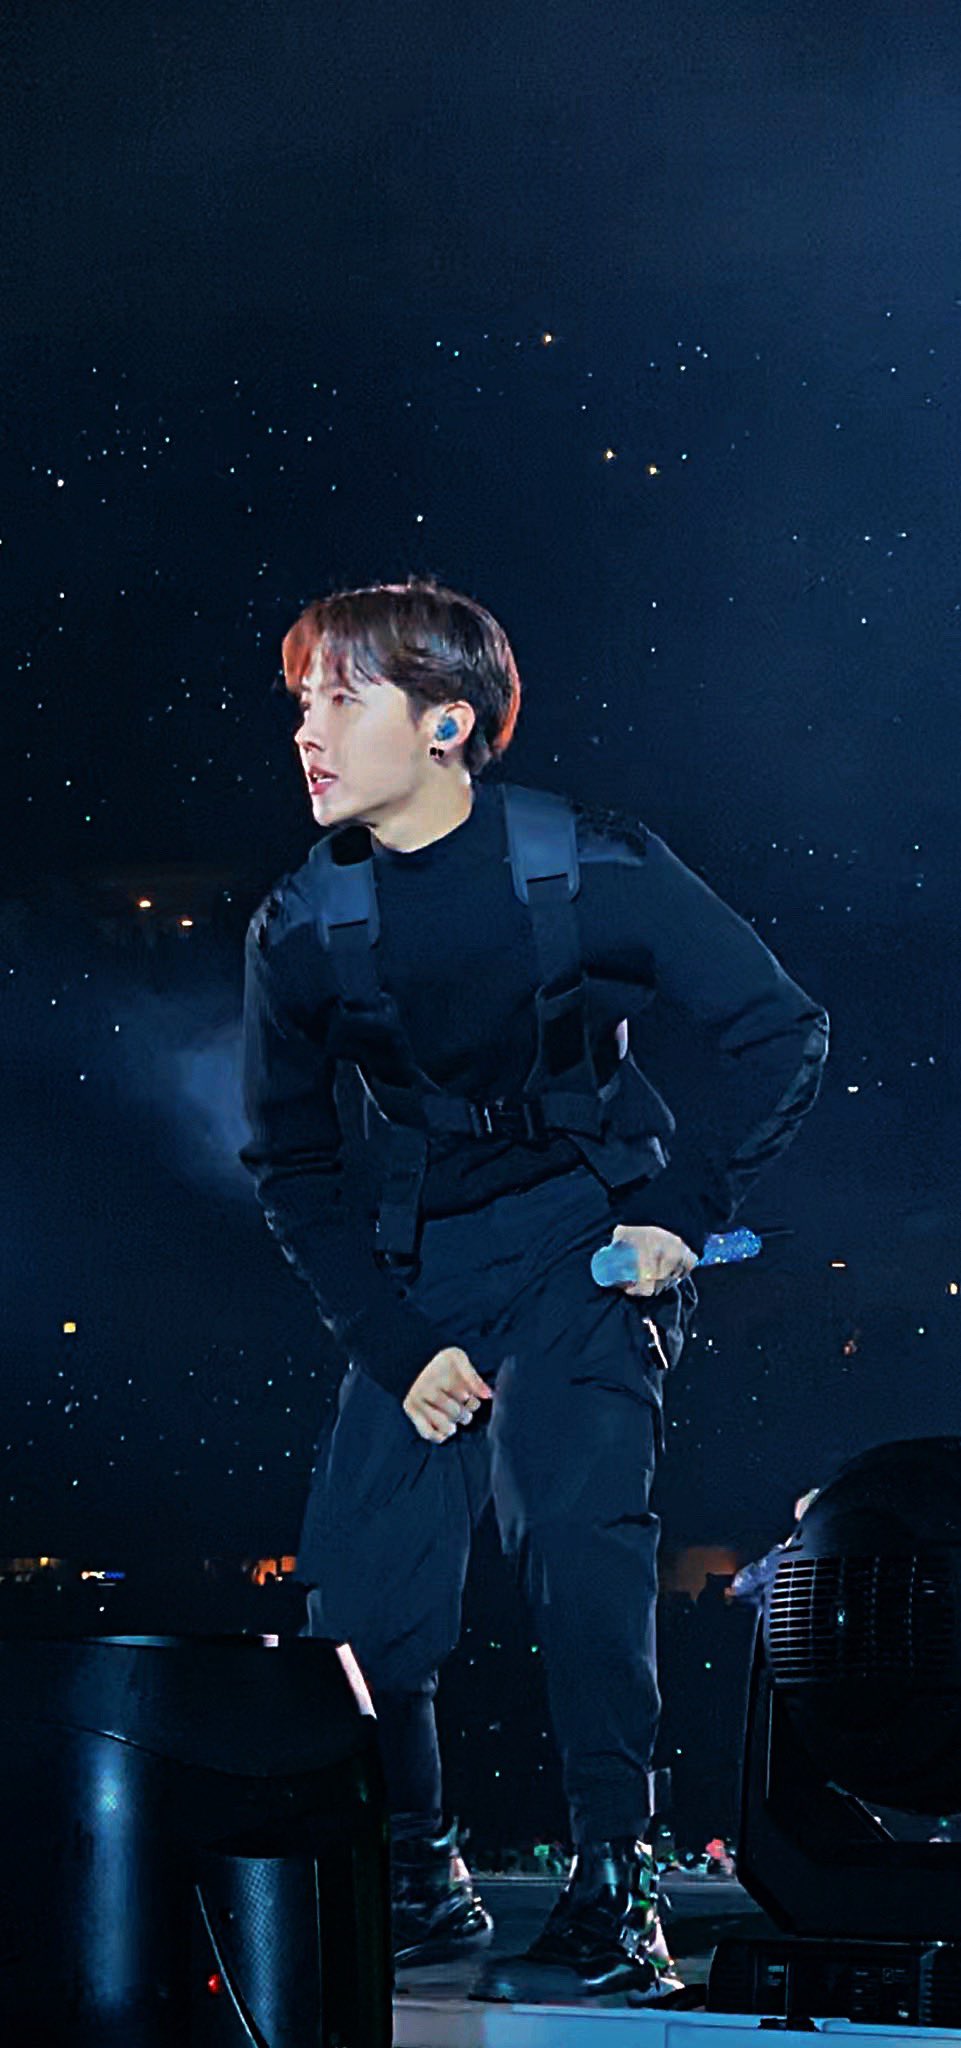 h✦pe on X: hobi said this outfit made the biggest inspiration on